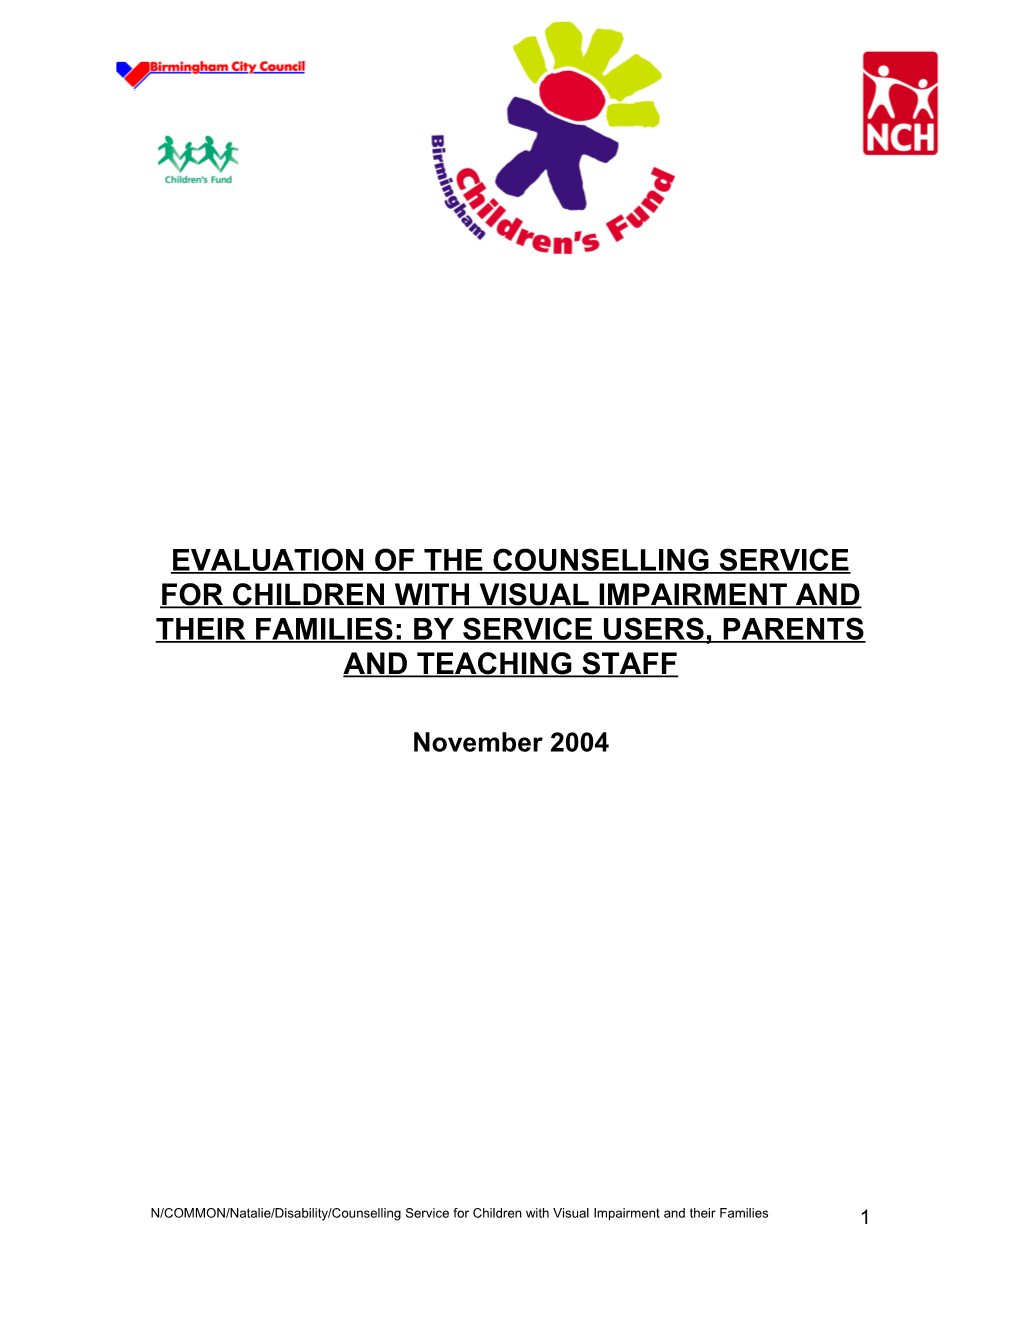 Evaluation of the Counselling Service